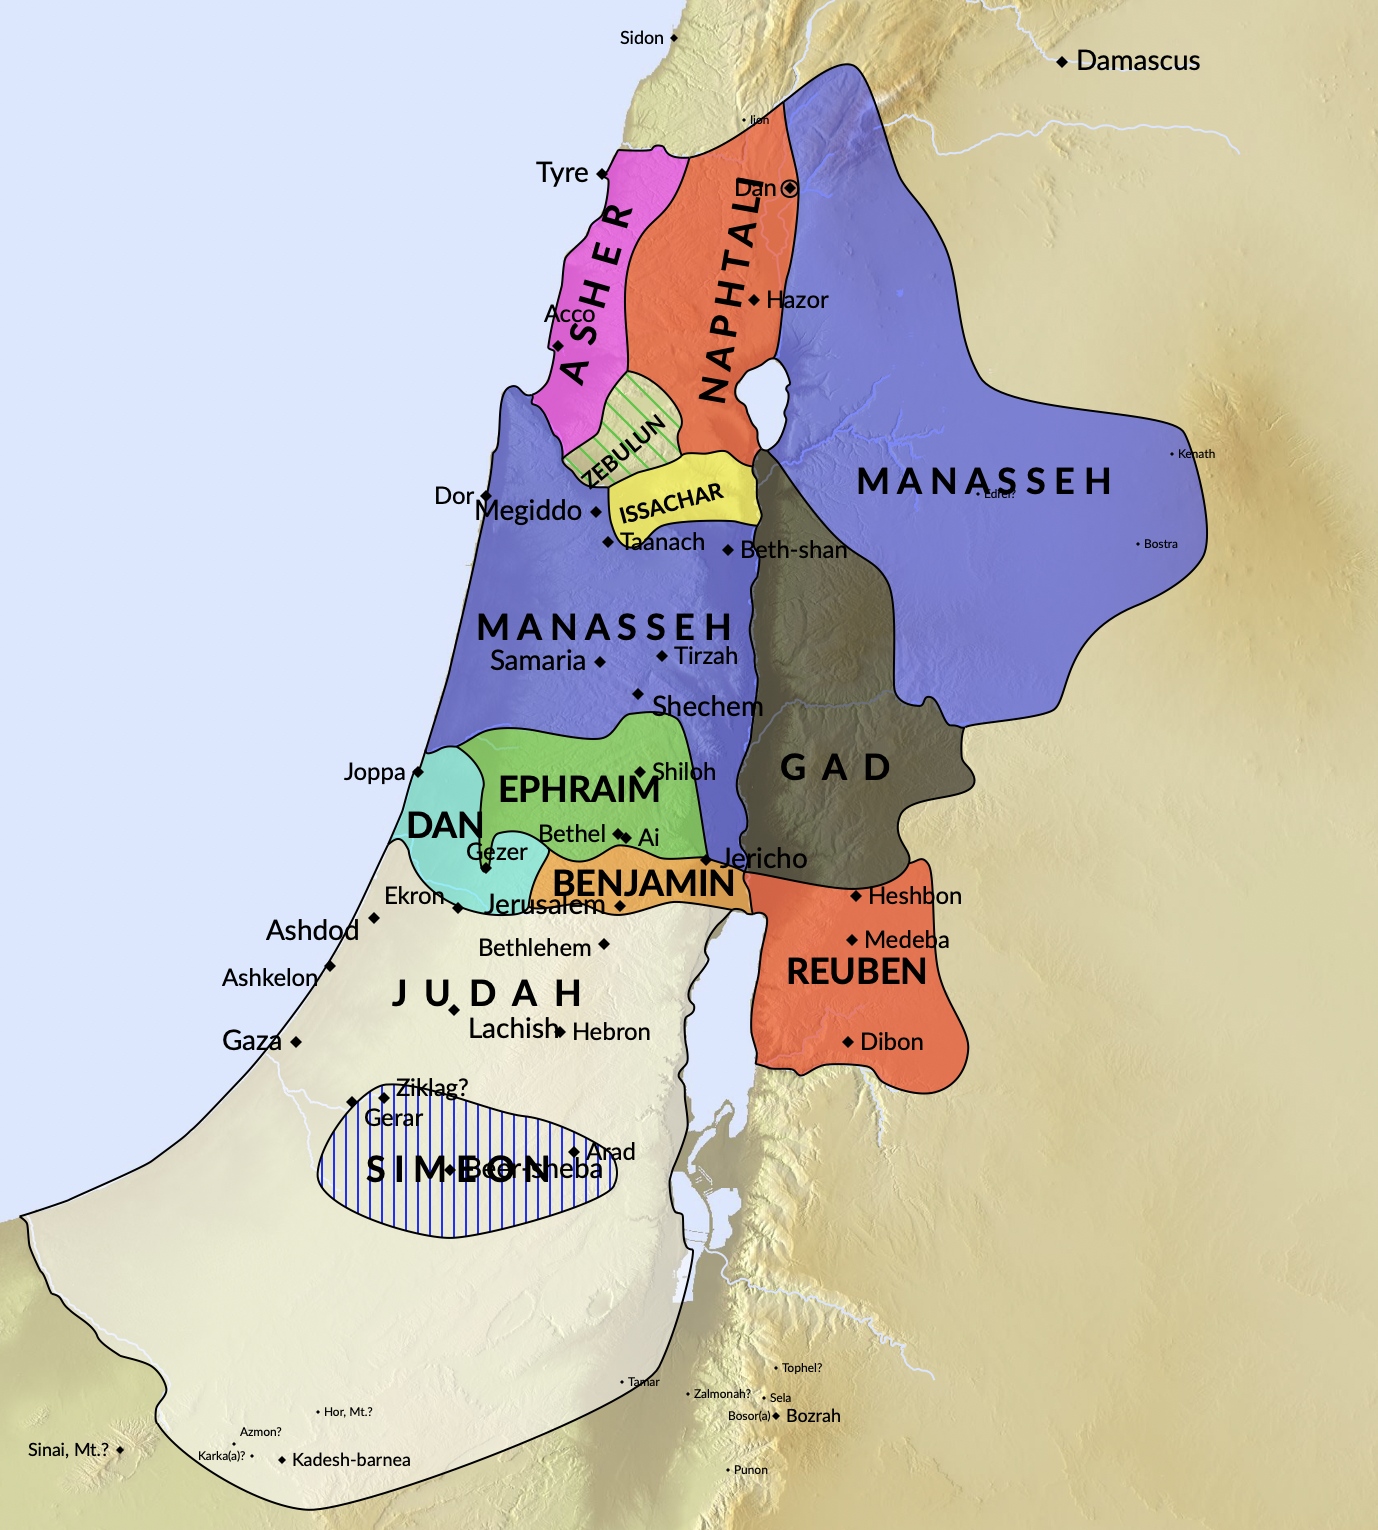 Tribal borders of the 12 tribes of Israel.